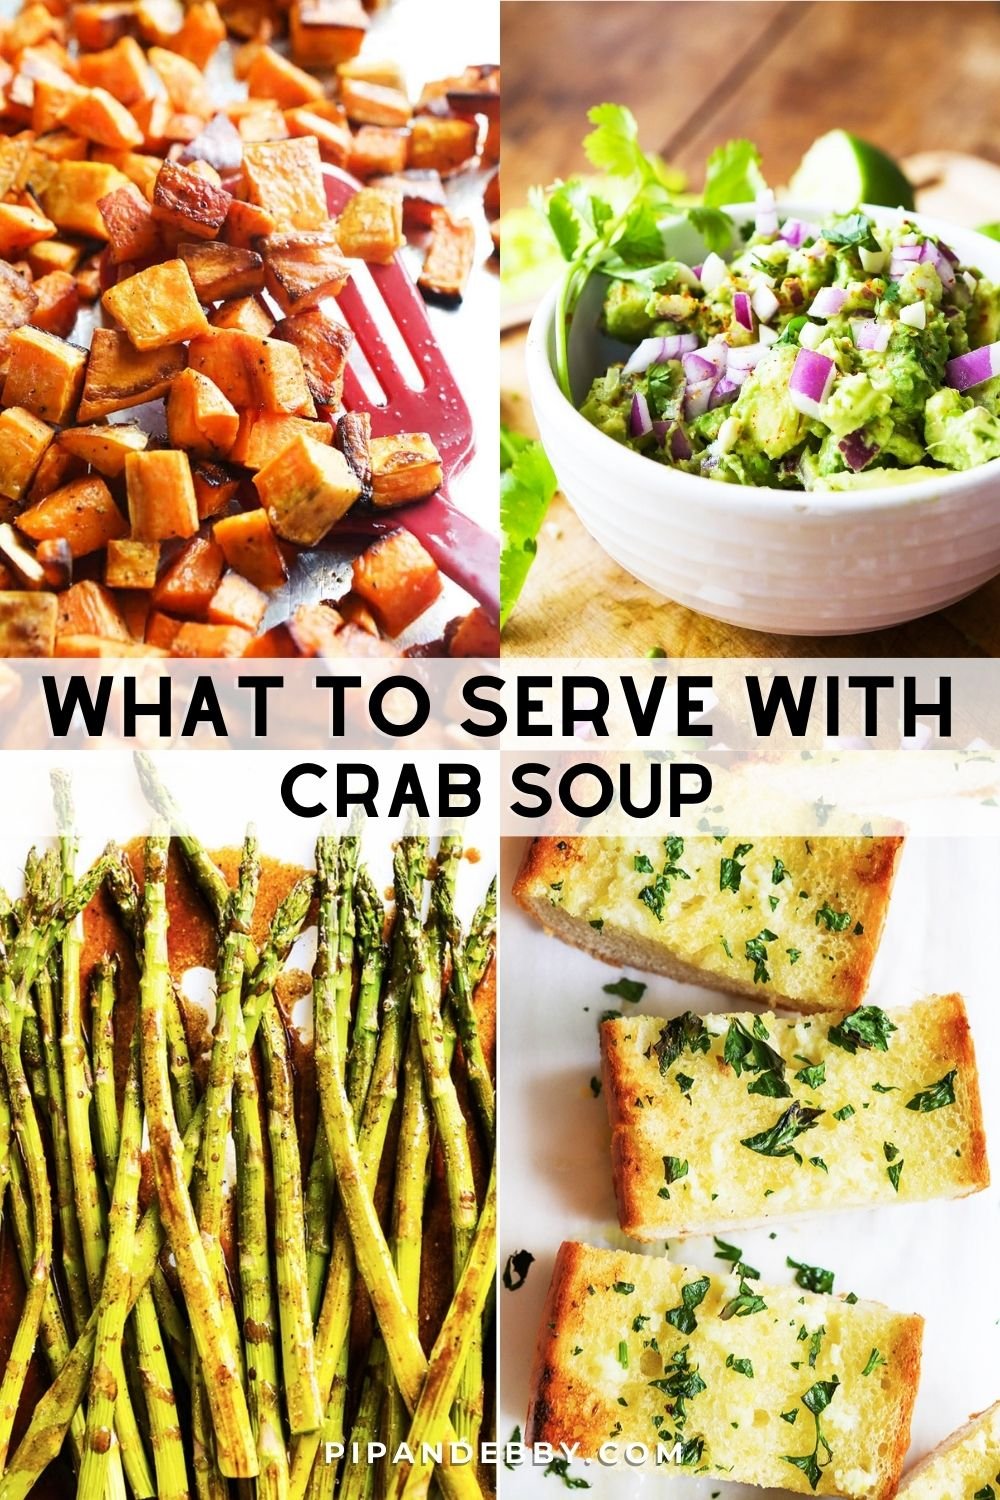 Collage of four food photos with text overlay reading, "What to serve with crab soup."